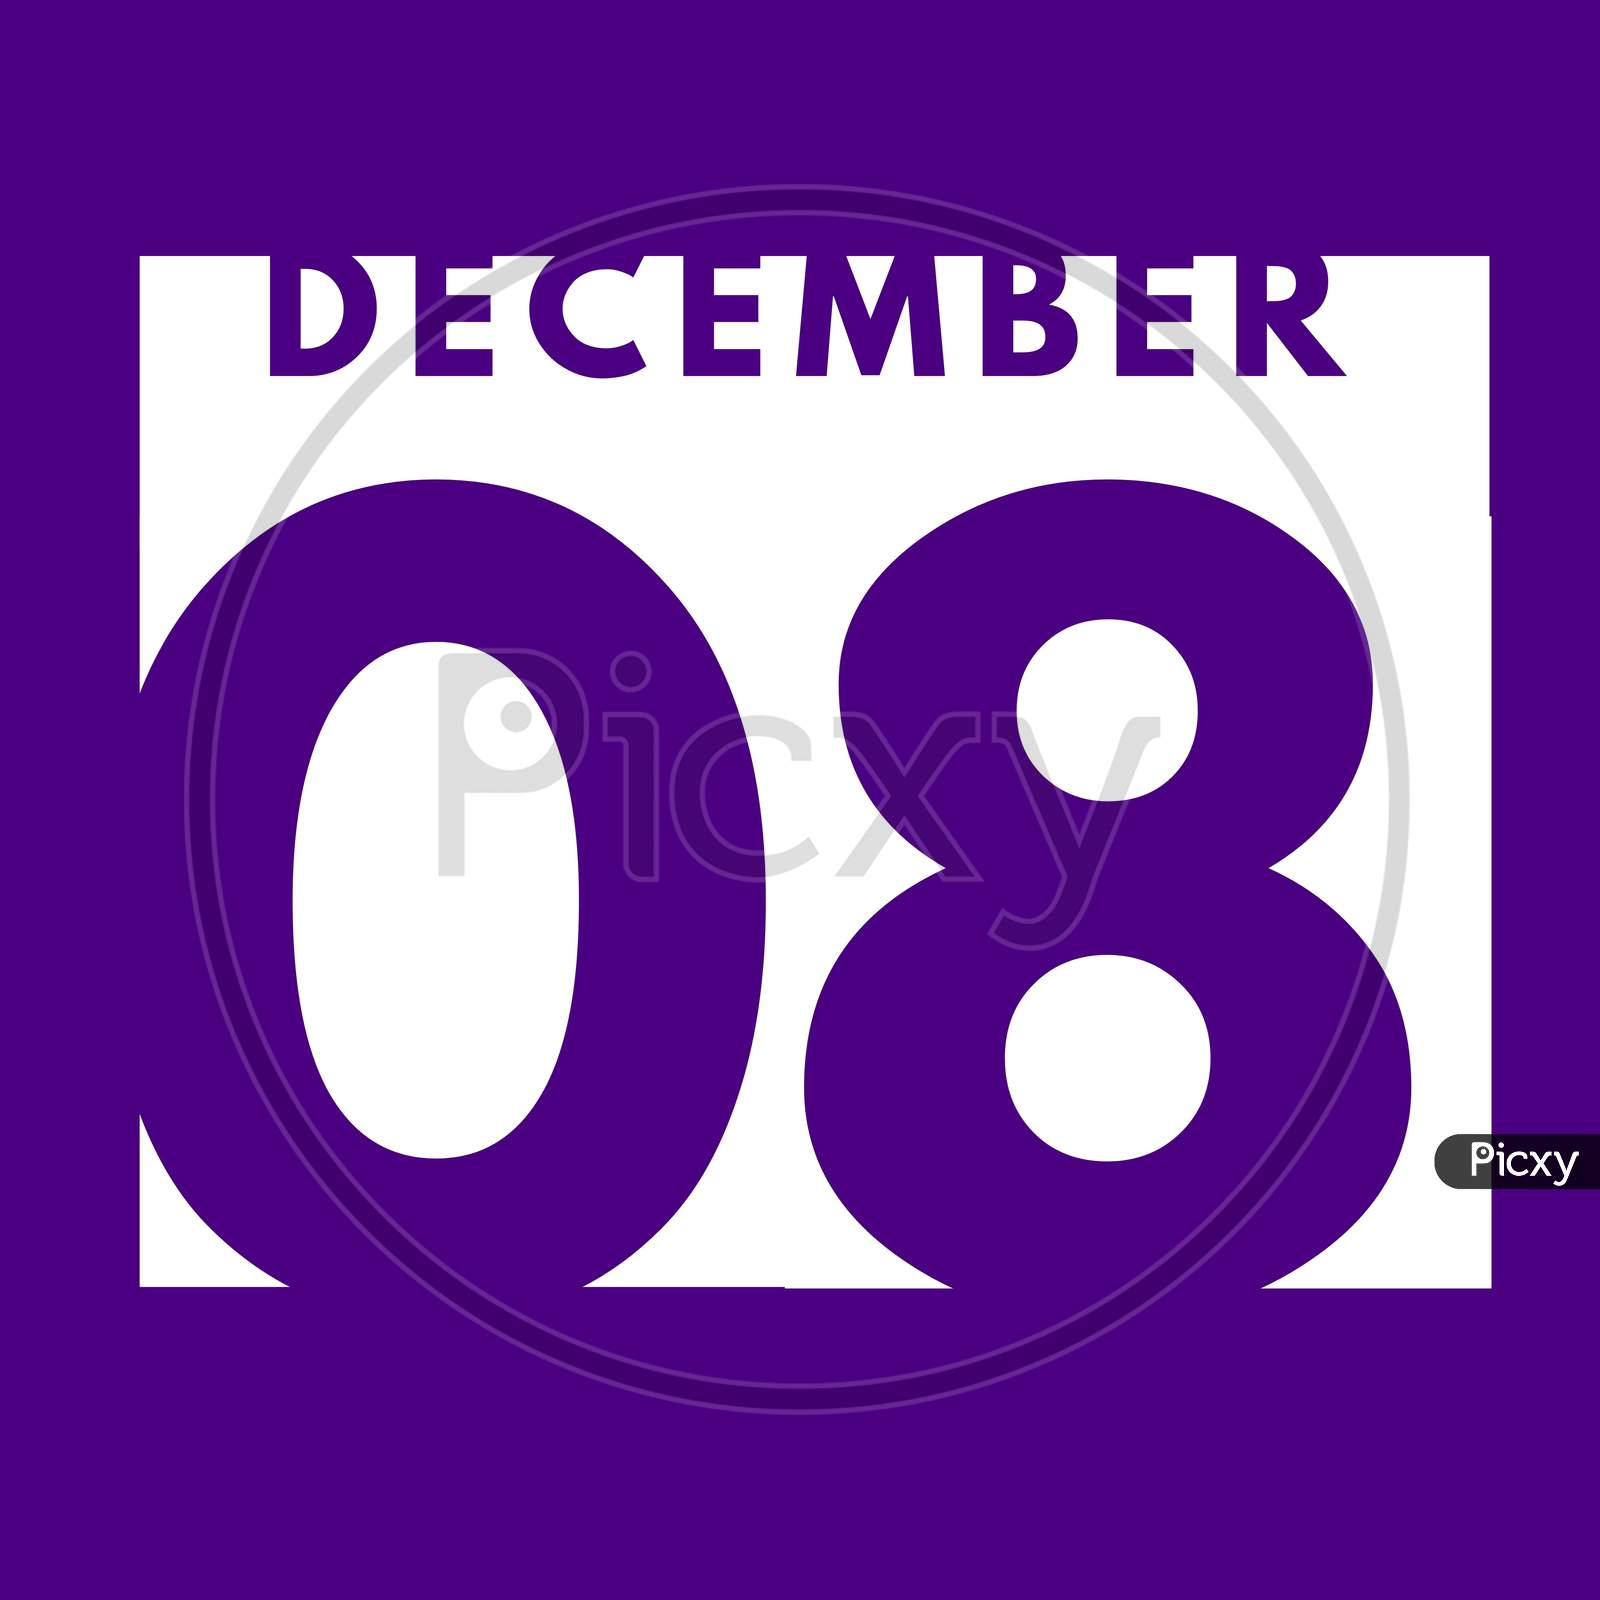 December 8 . Flat Modern Daily Calendar Icon .Date ,Day, Month .Calendar For The Month Of December